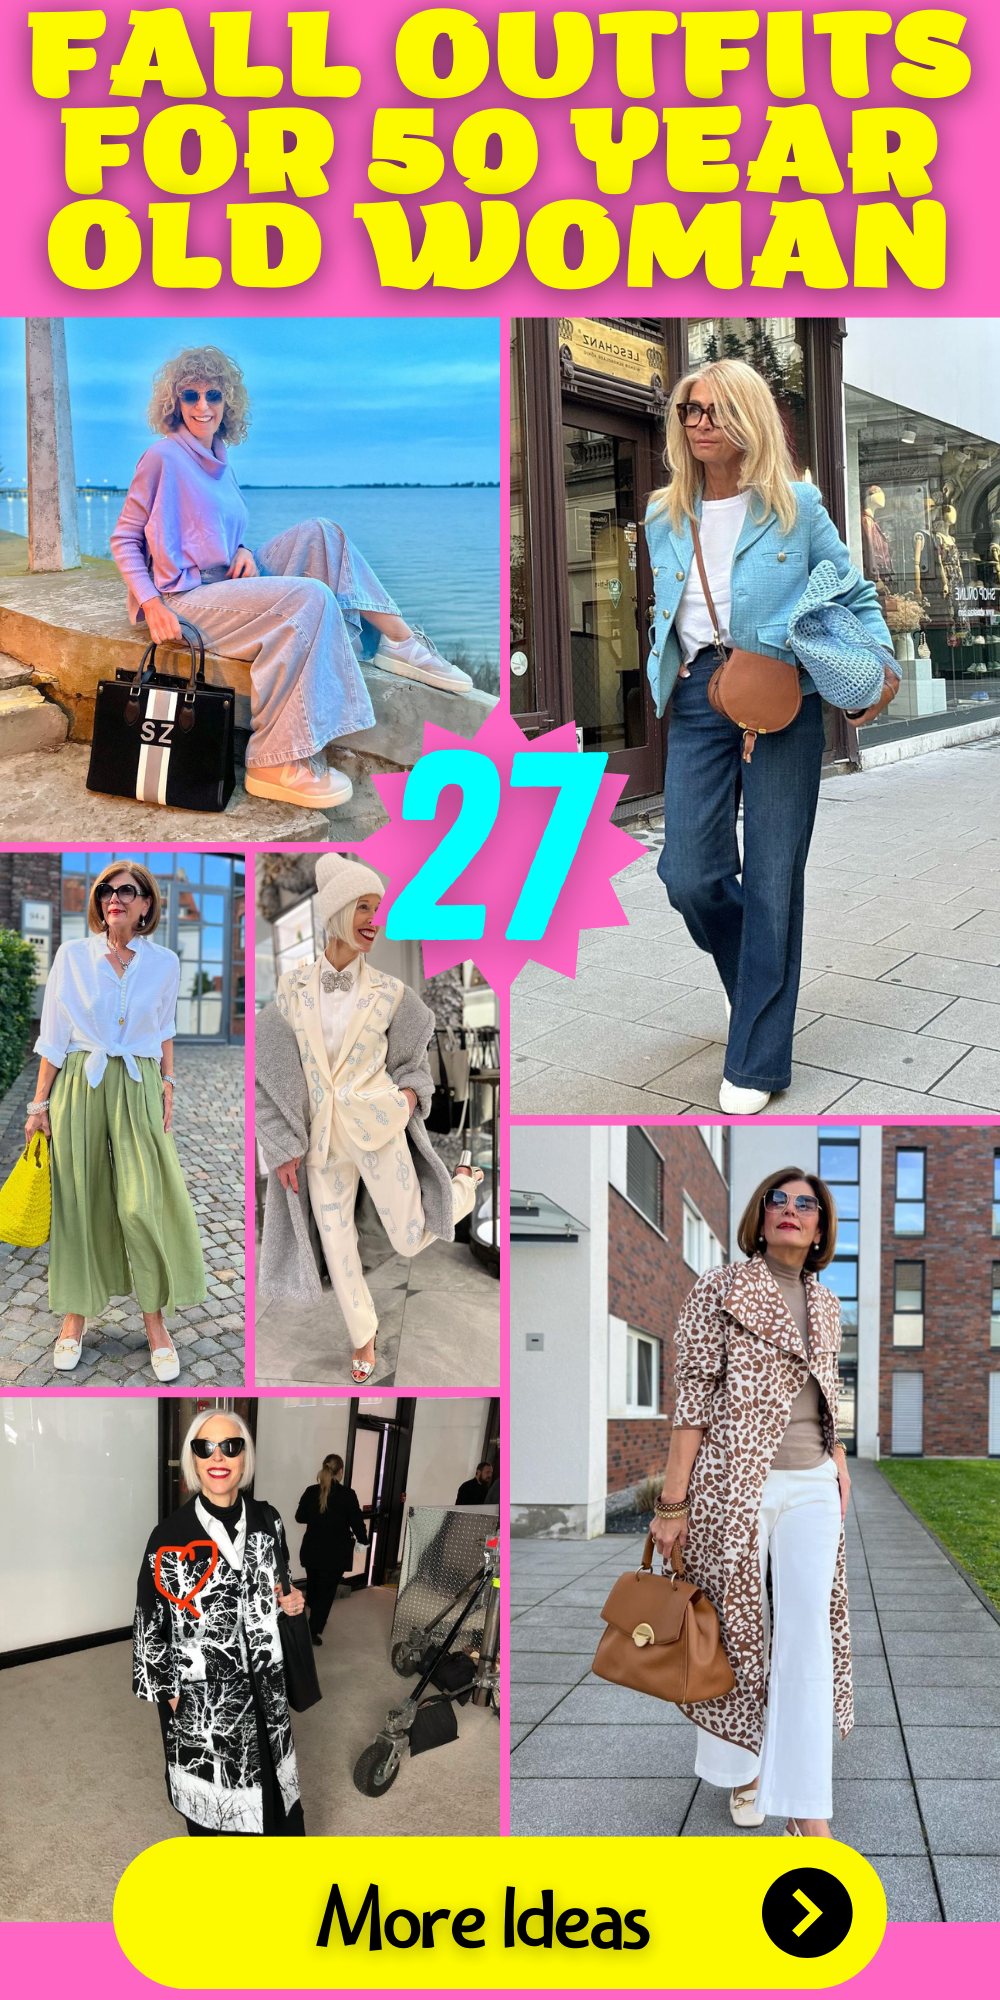 27 Fall Outfits for 50-Year-Old Women: Trendy, Casual, and Classy Ideas